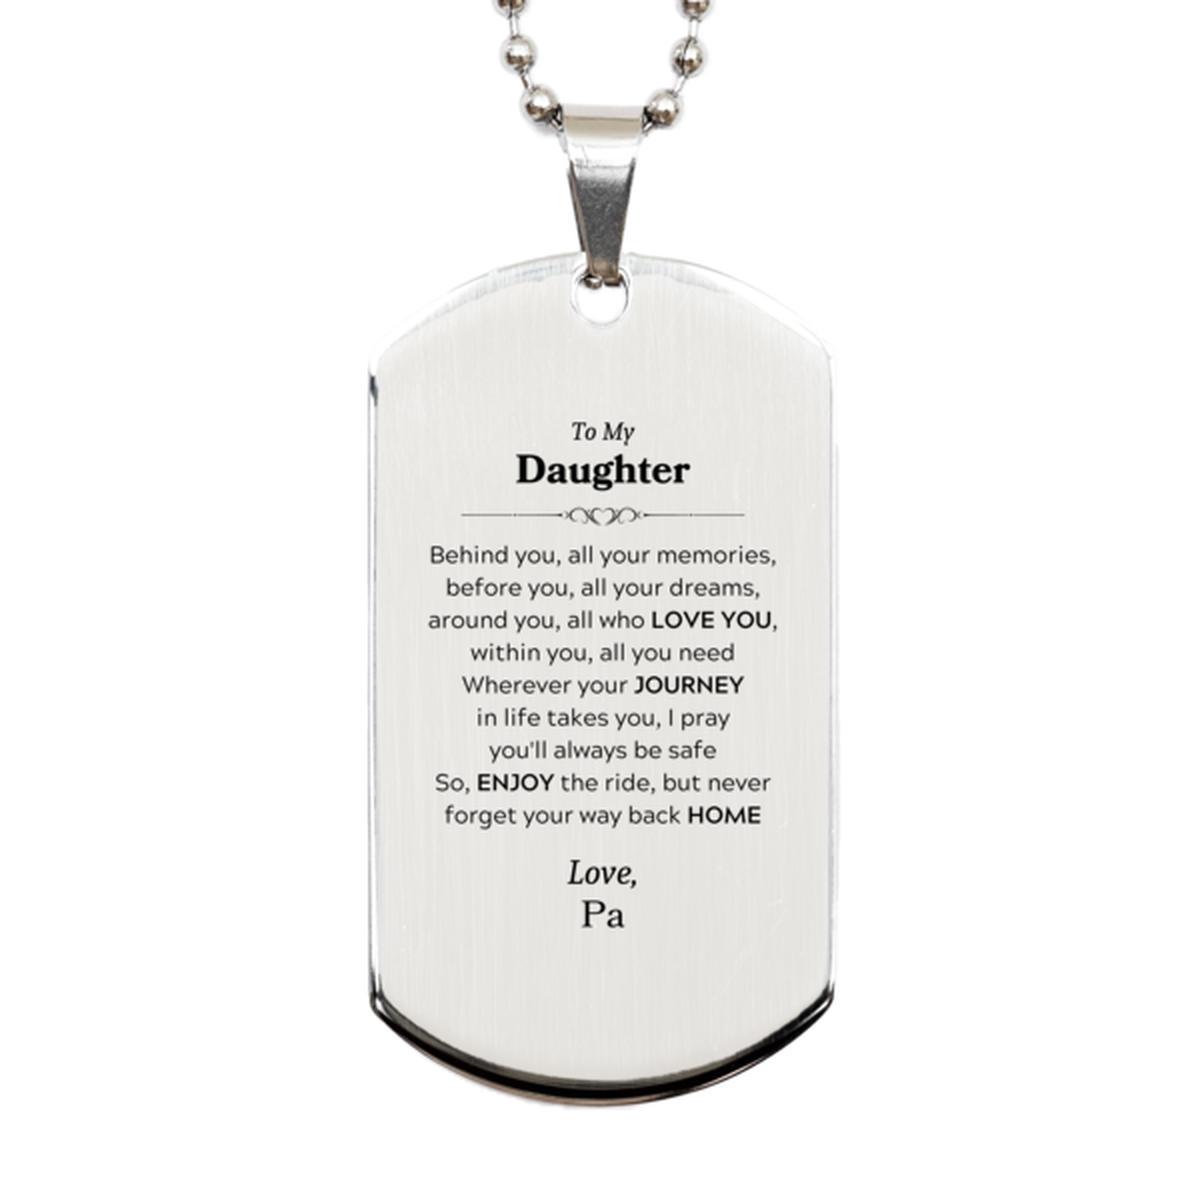 To My Daughter Graduation Gifts from Pa, Daughter Silver Dog Tag Christmas Birthday Gifts for Daughter Behind you, all your memories, before you, all your dreams. Love, Pa